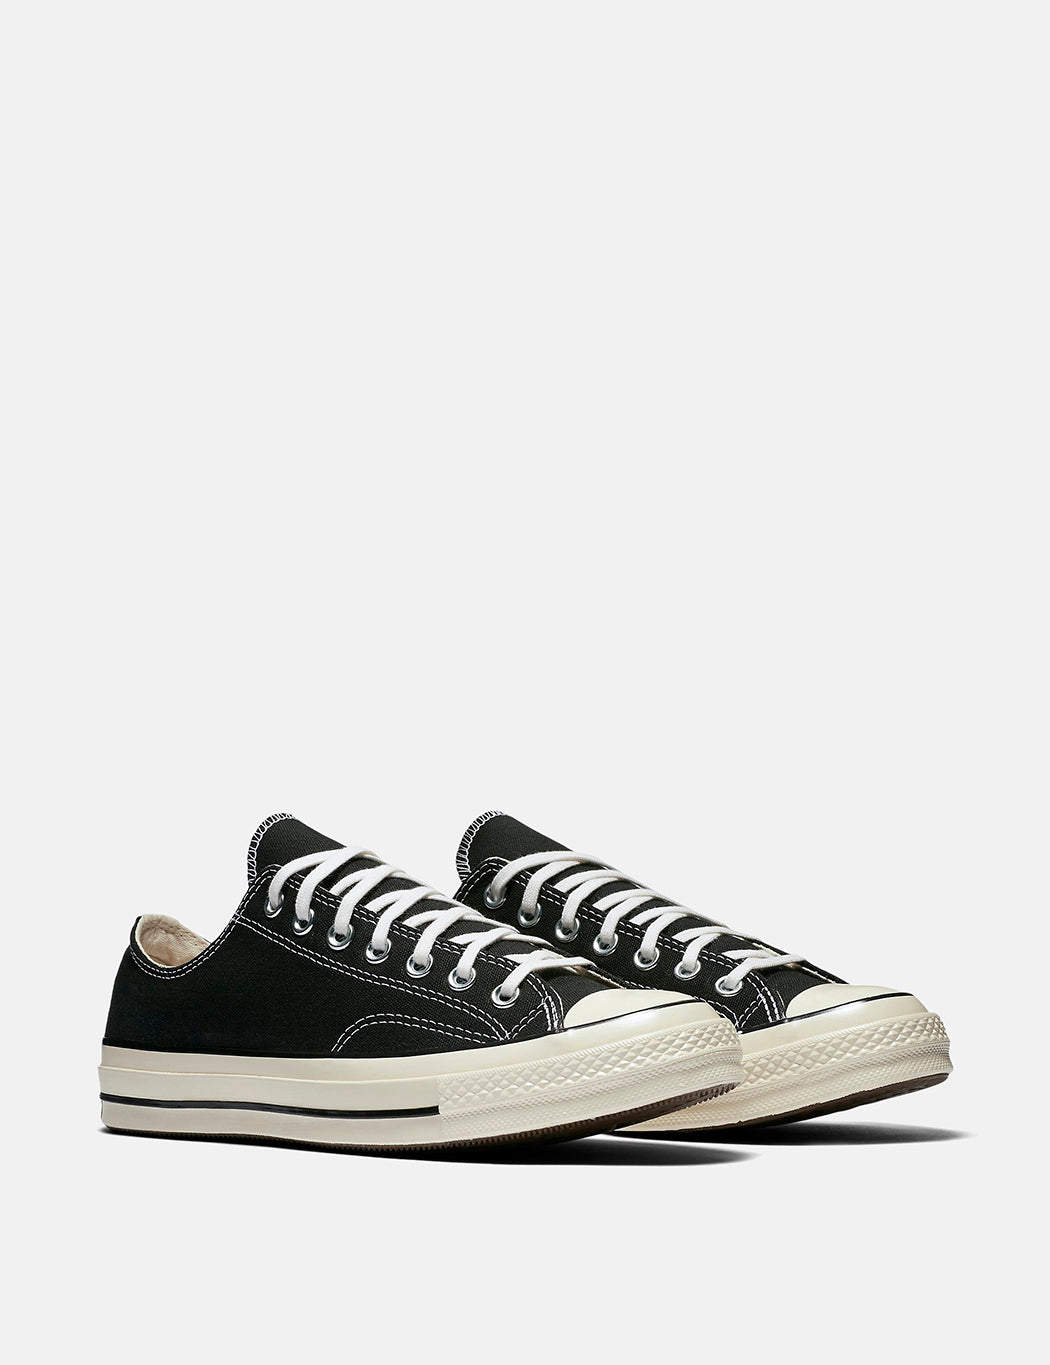 black and white low converse